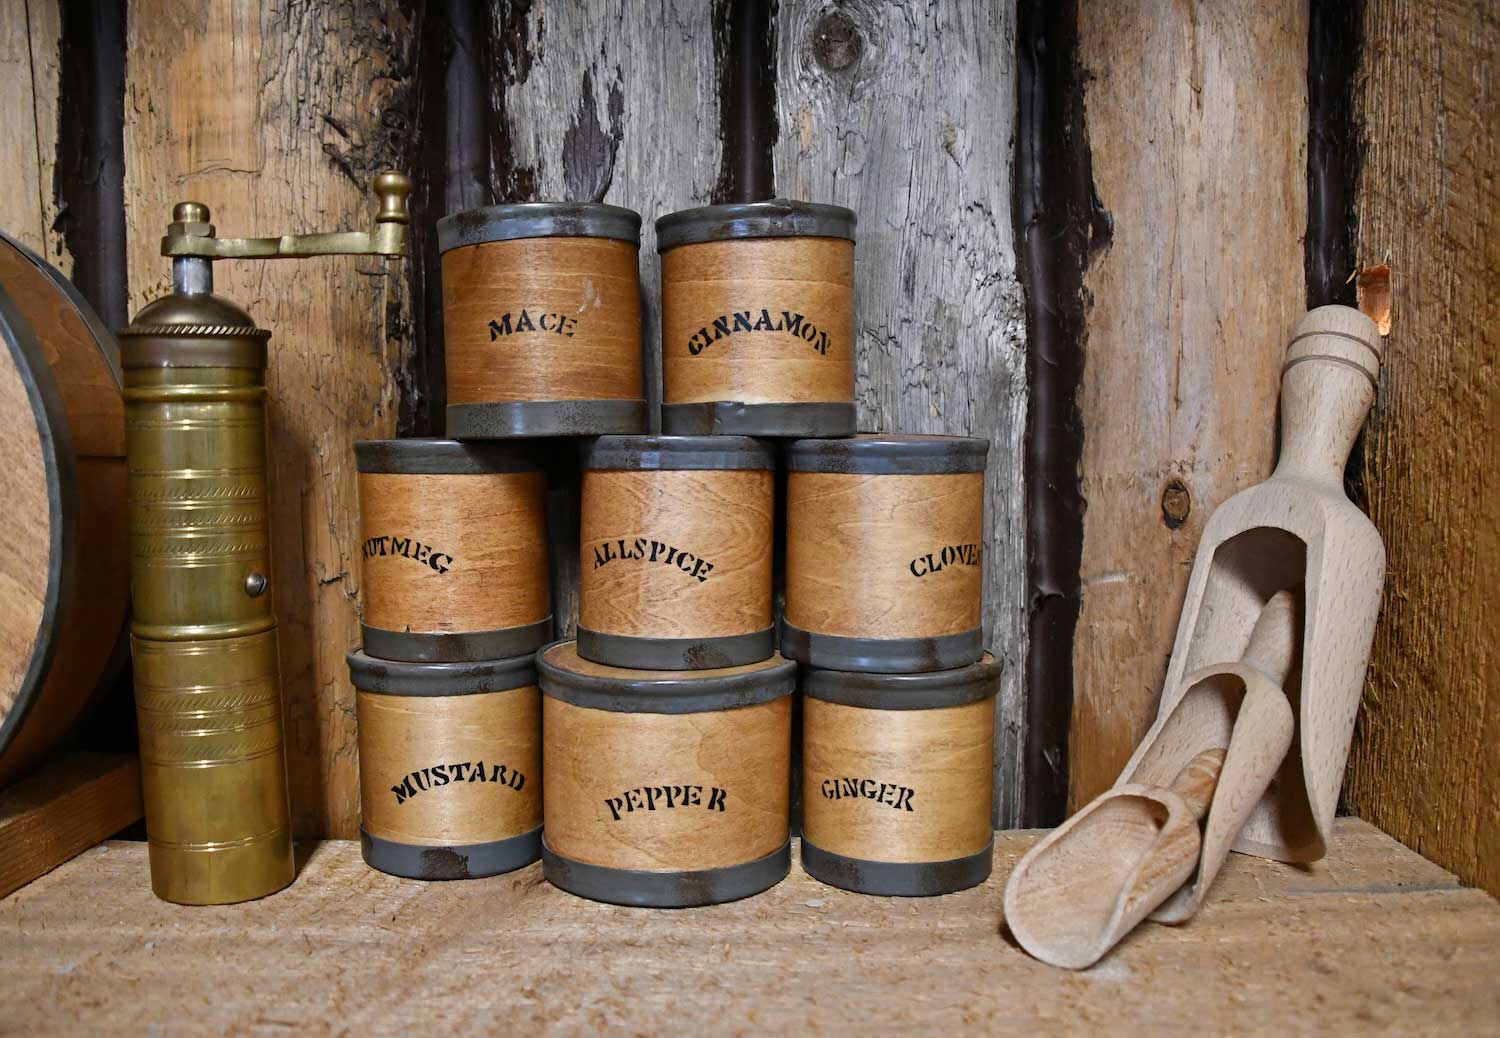 Replica goods from an old general store or trader's cabin.